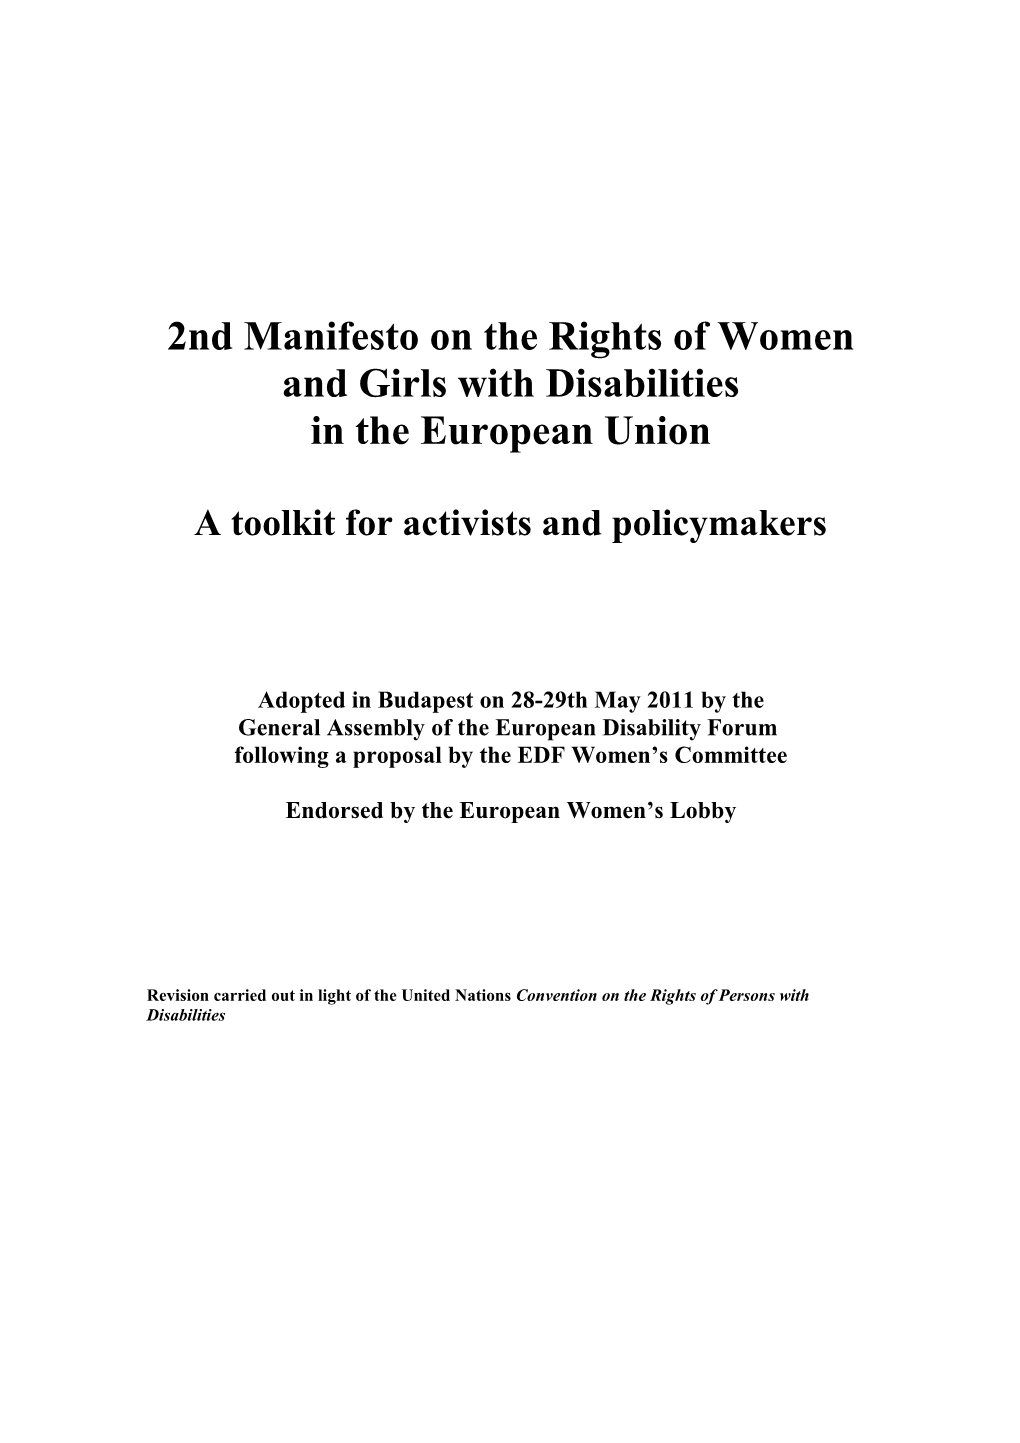 Manifesto on the Rights of Women and Girls with Disabilities in the EU